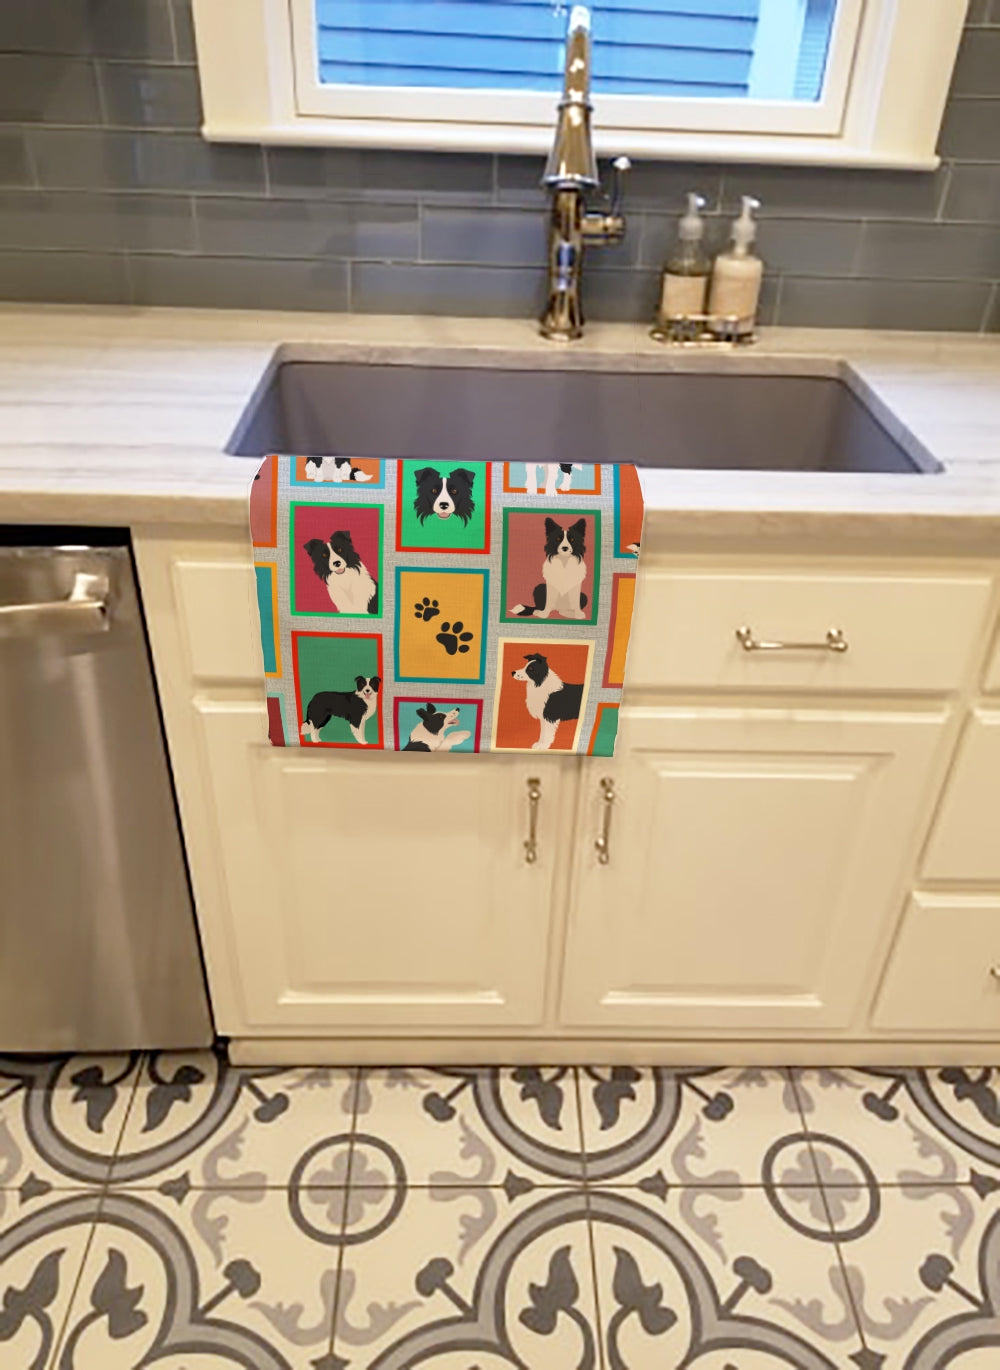 Buy this Lots of Border Collie Kitchen Towel